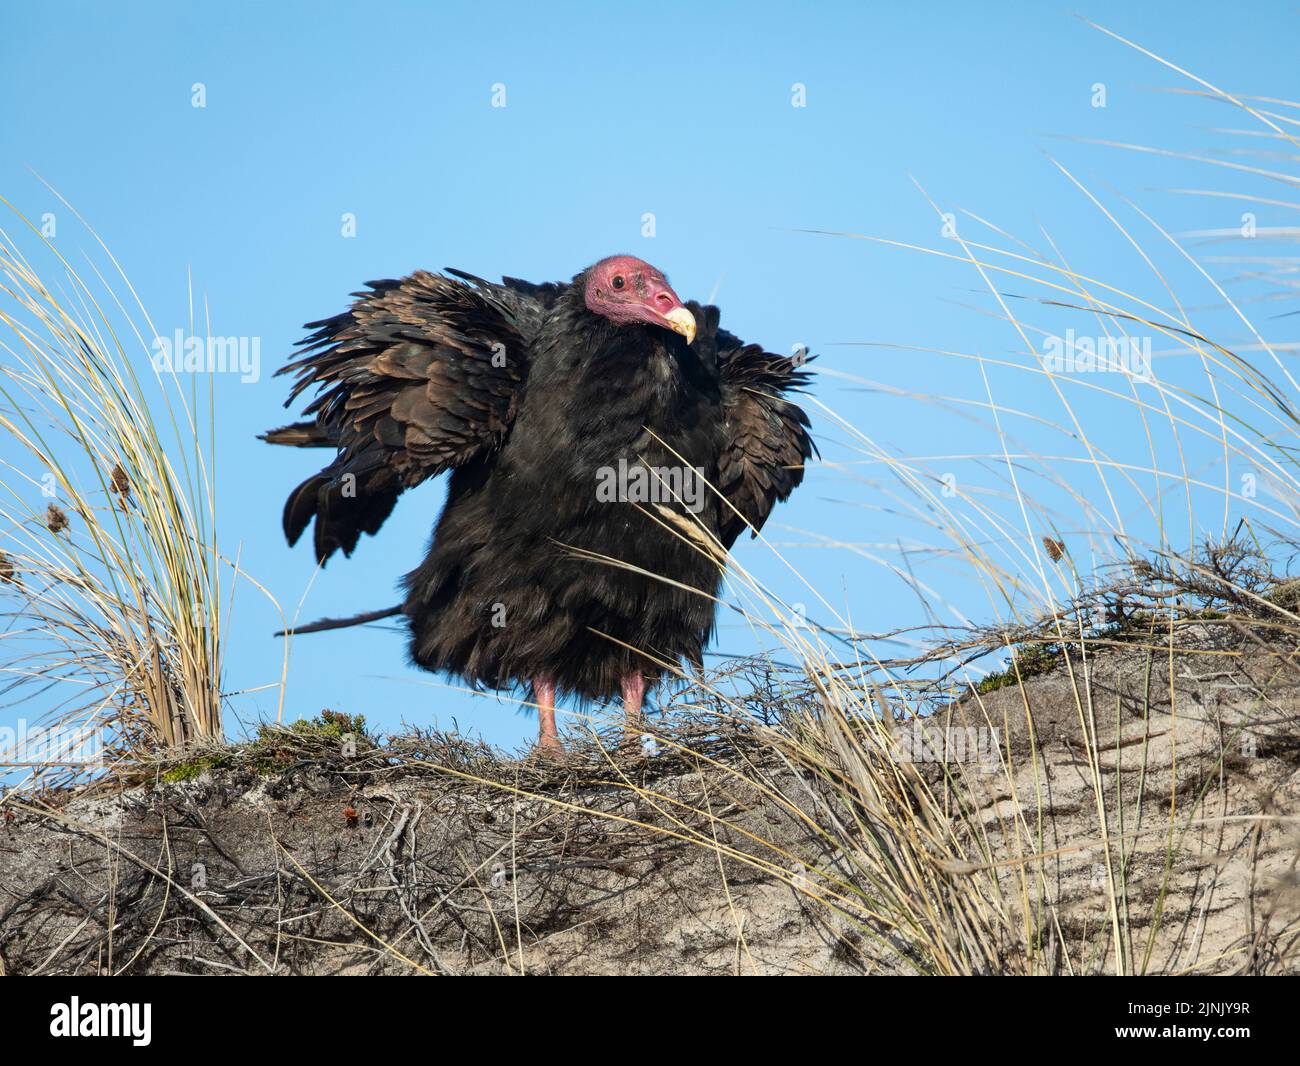 Portrait of a Turkey vulture (Cathartes aura) taken in the Falkland Islands Stock Photo